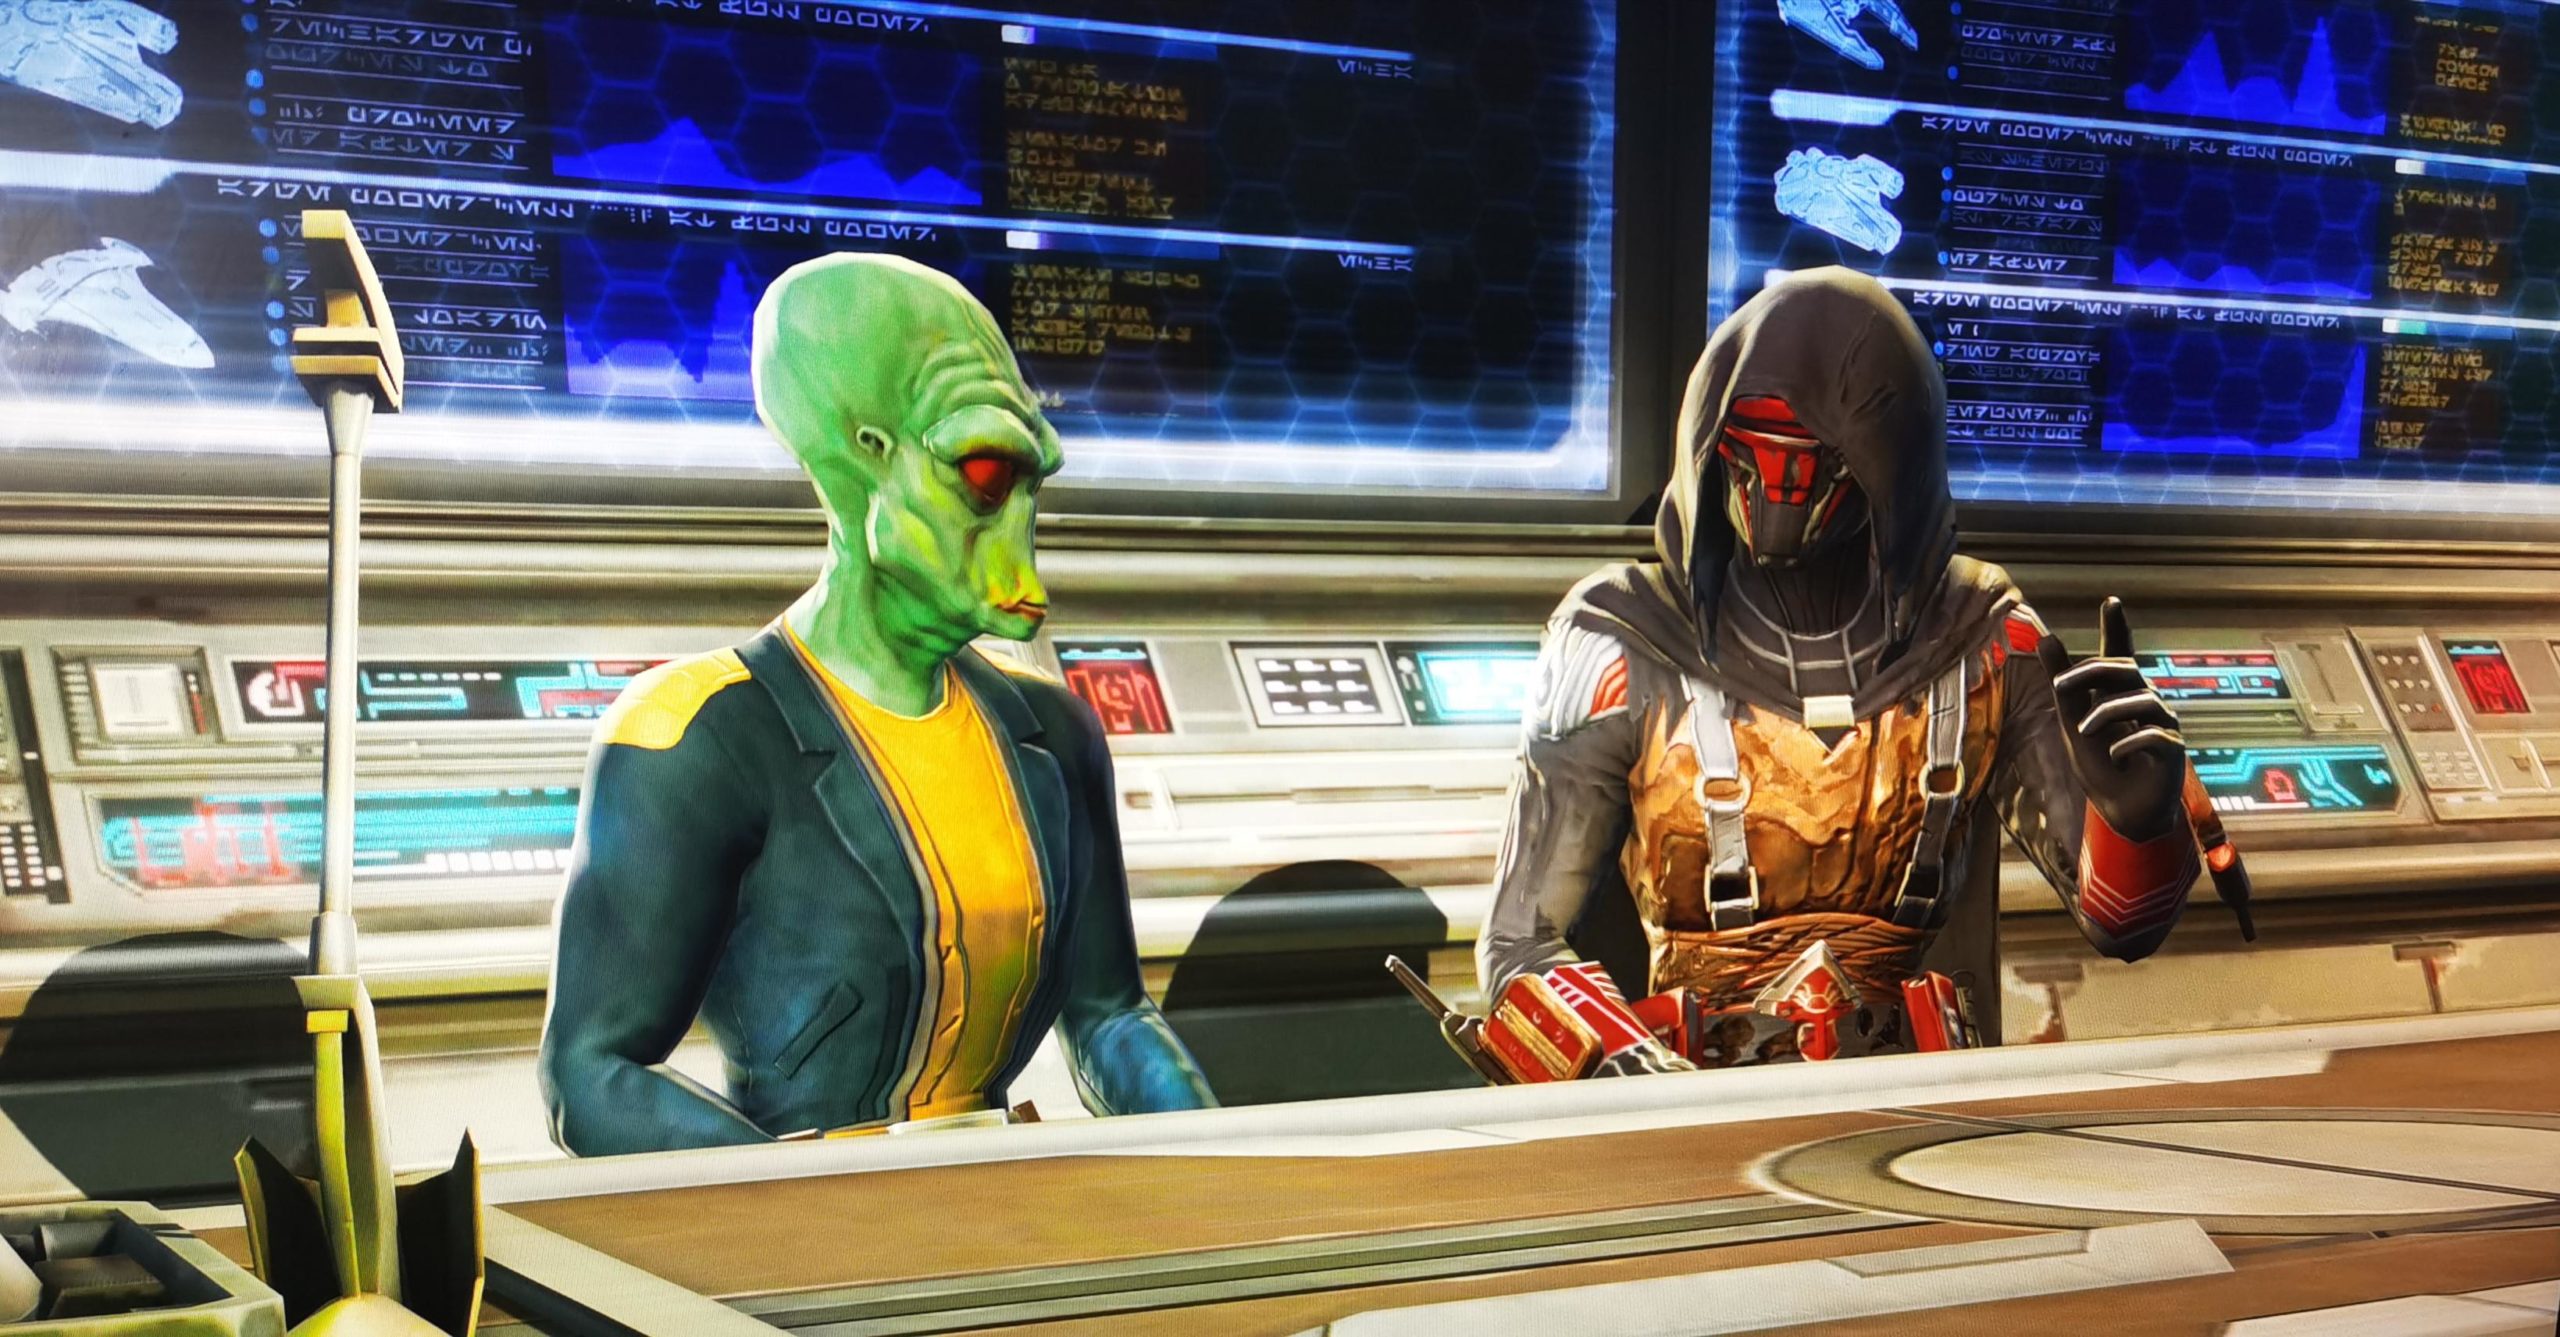 SWTOR InGame Events for June 2020